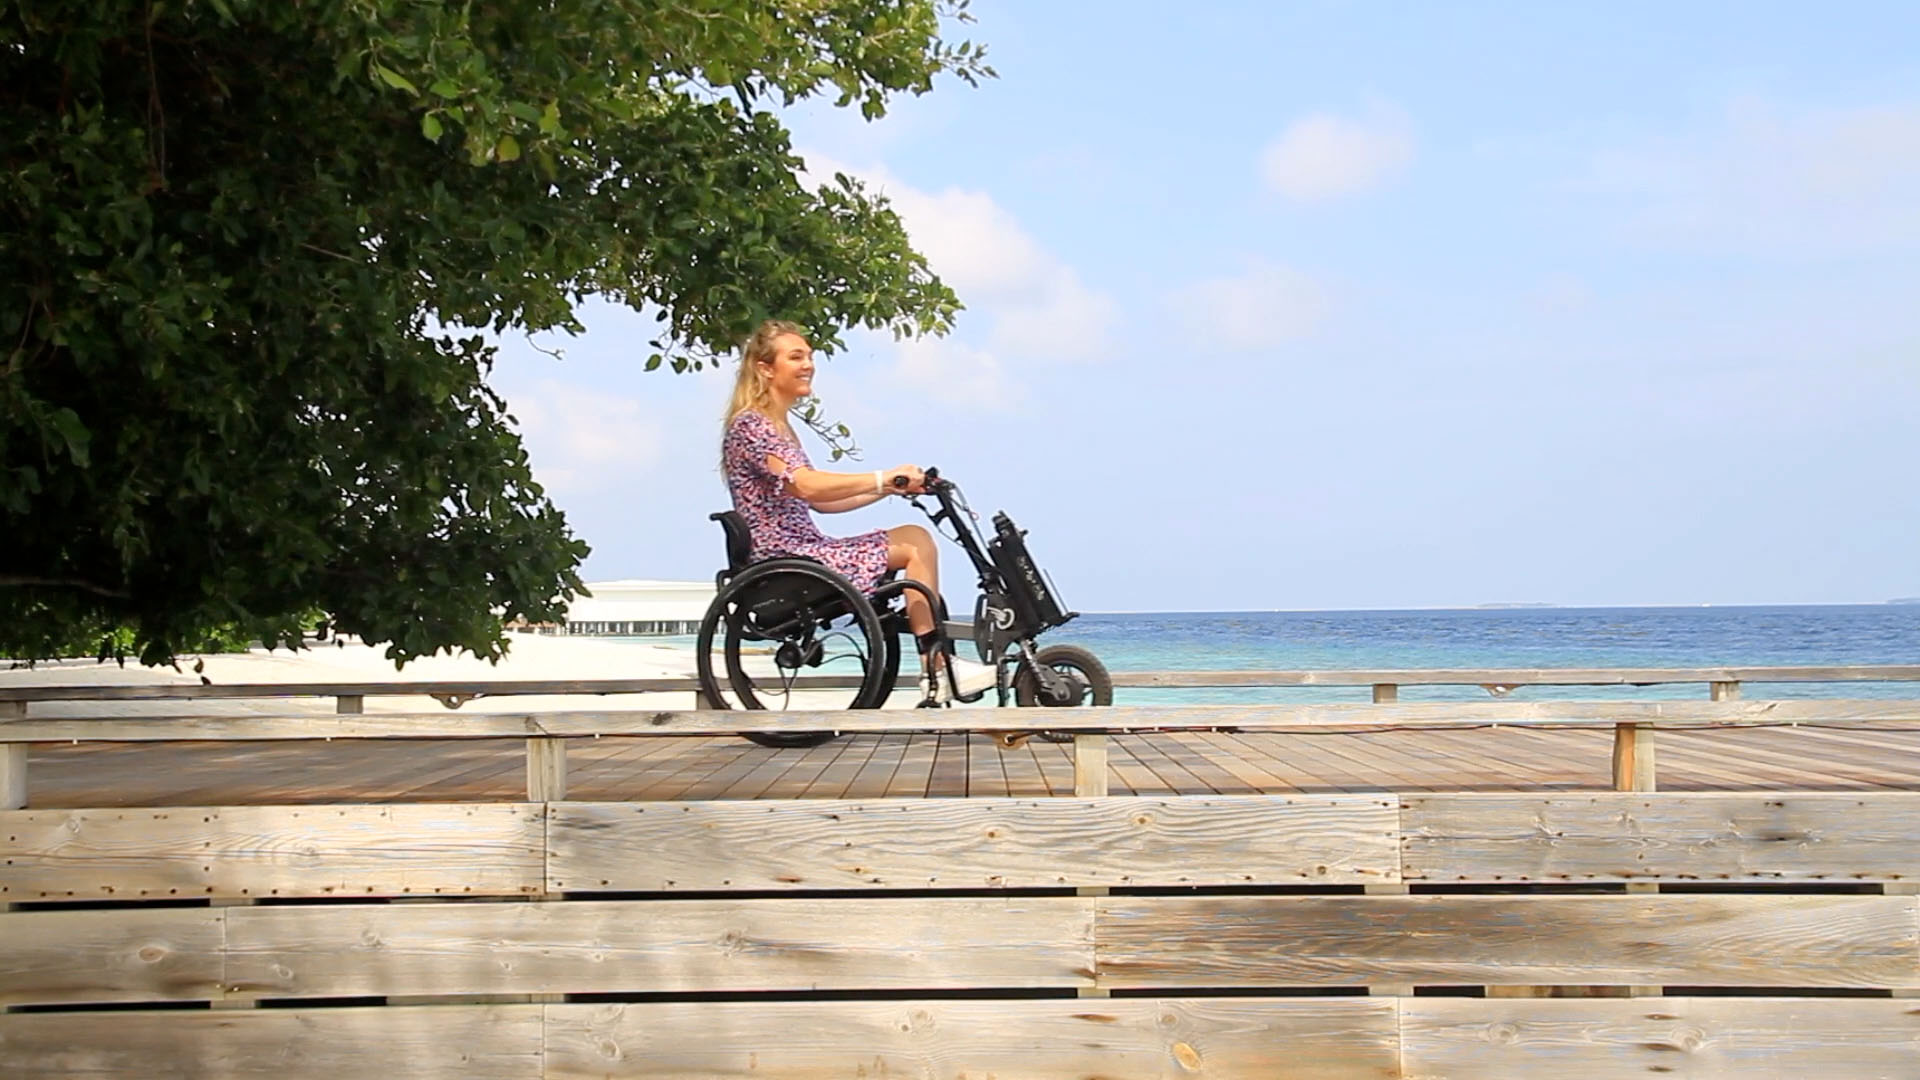 Sophie Morgan visiting Amilla Fushi, a wheelchair accessible beach resort in the Maldives dedicated to inclusive hospitality.